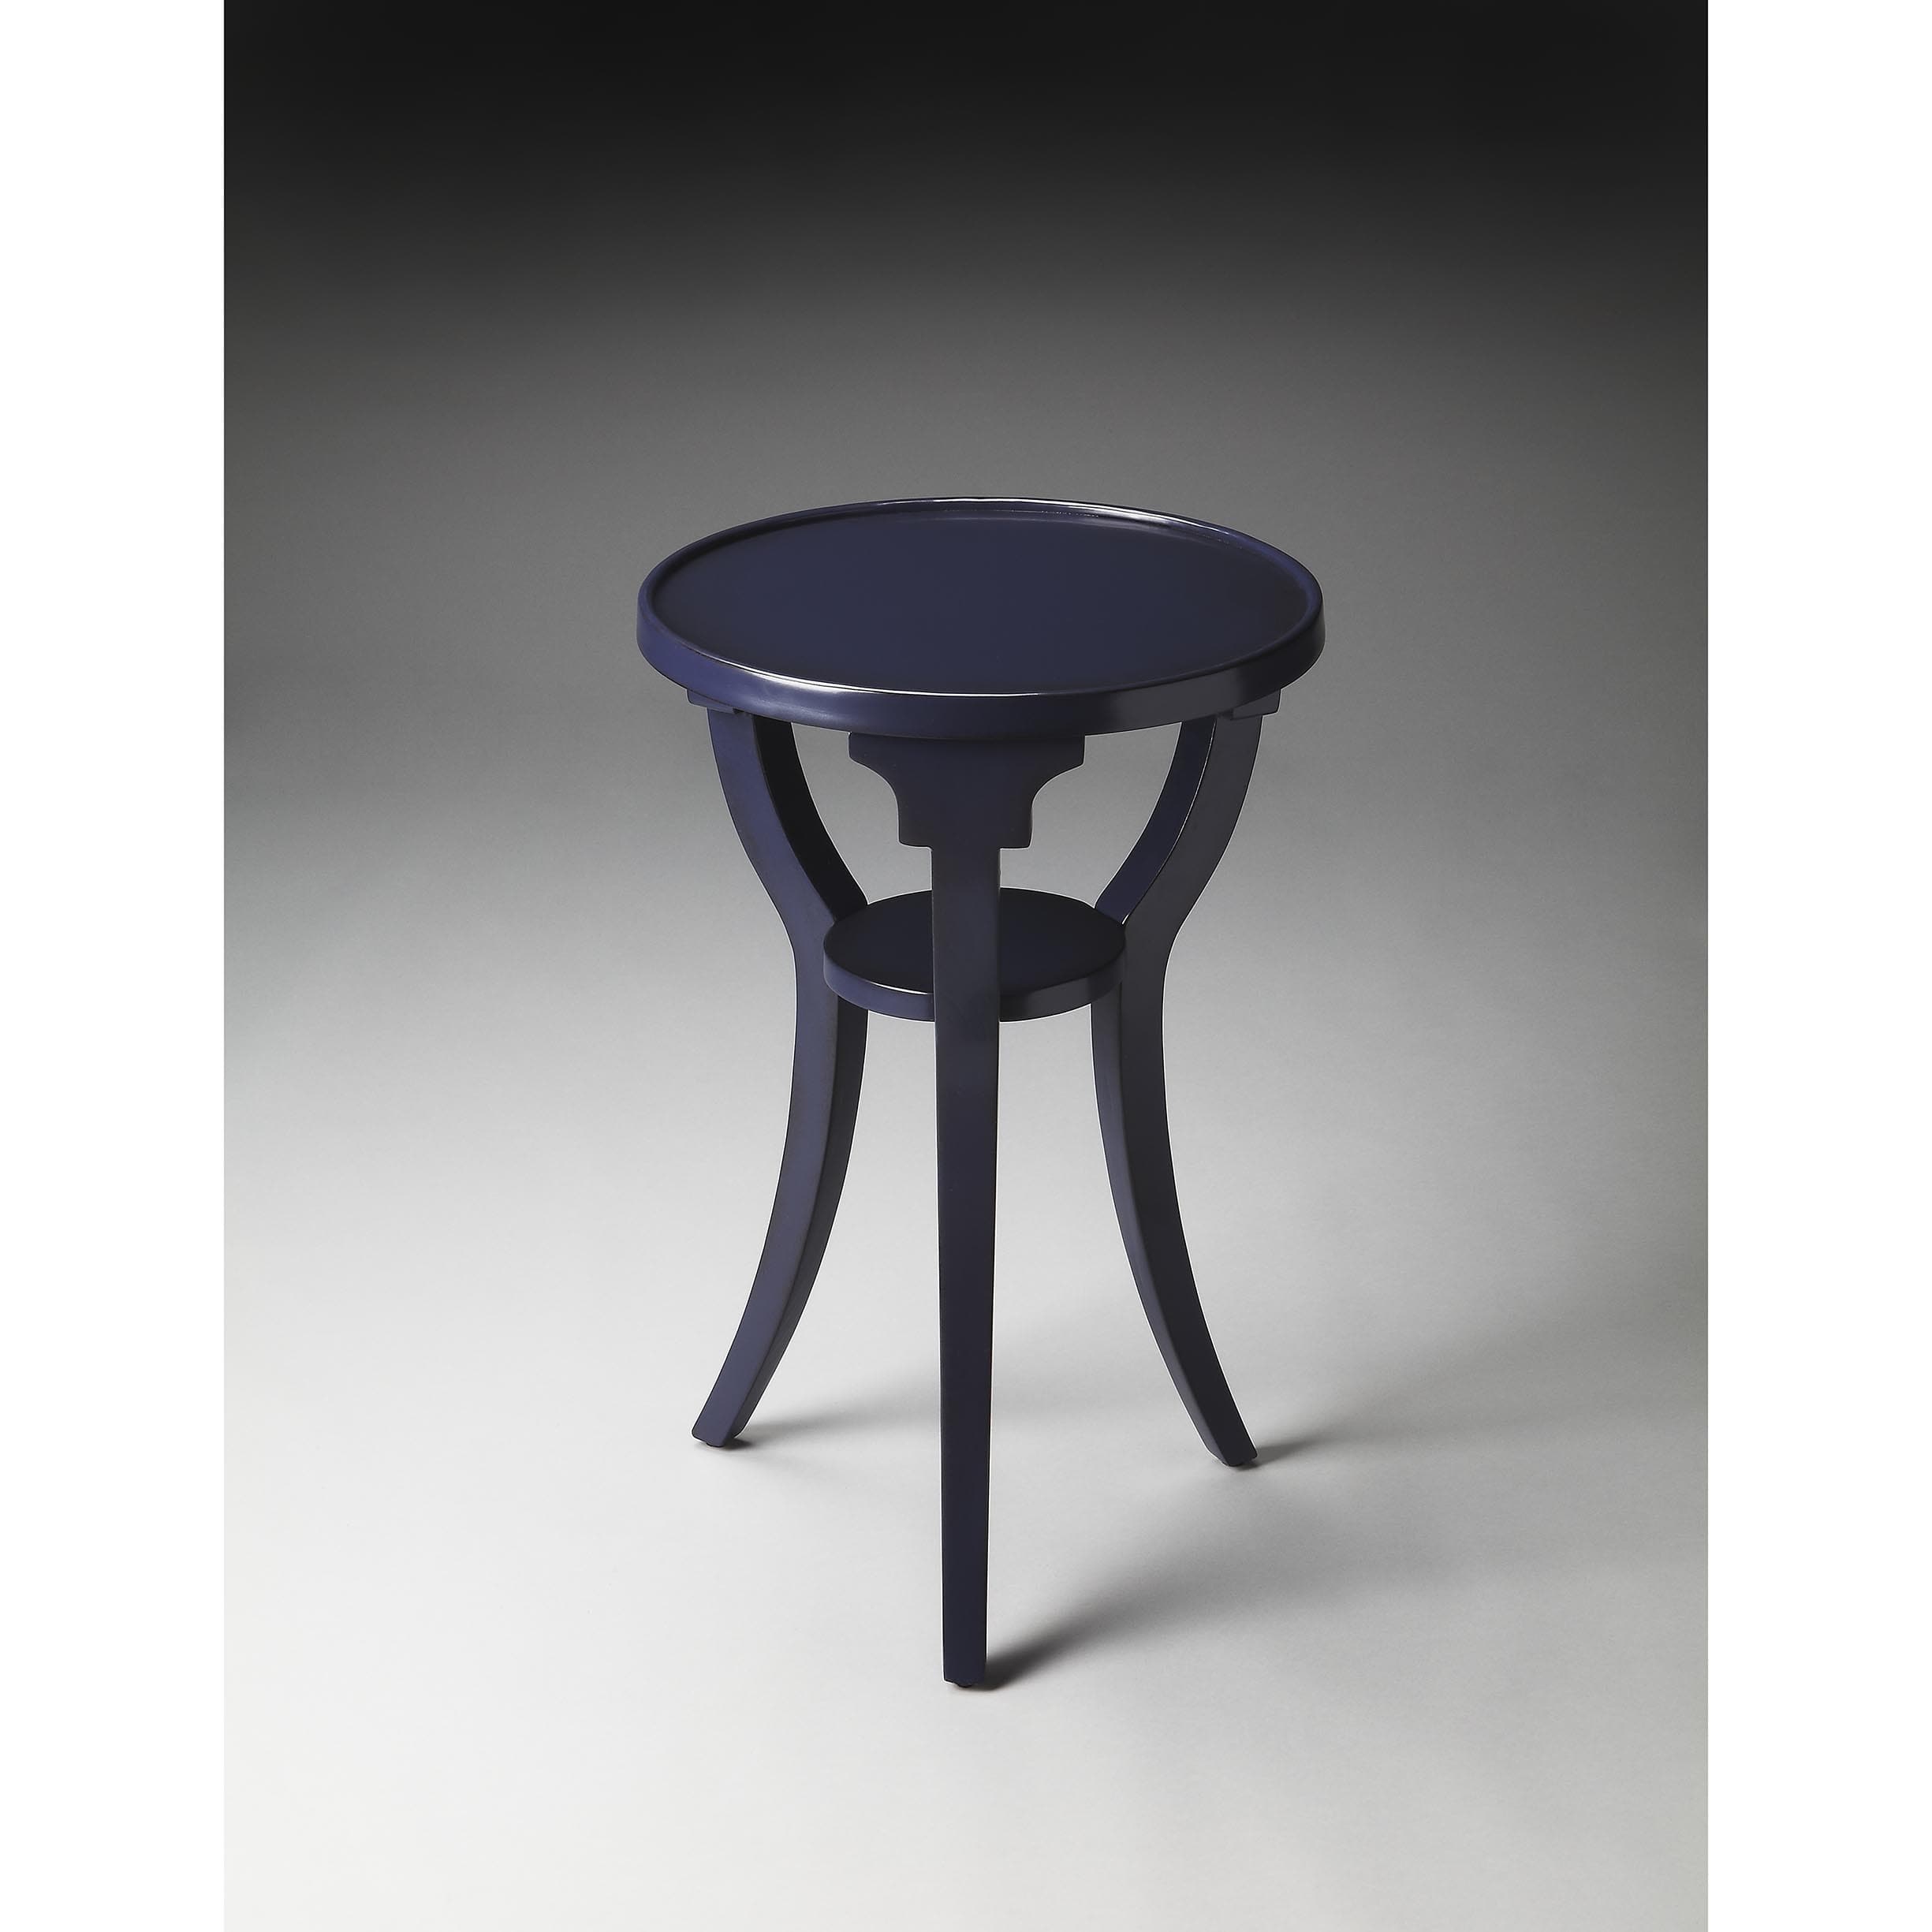 handmade butler dalton navy round end table free accent shipping today ikea cube boxes front door activity wood pedestal lamps plus tables outdoor rocker ethan allen farm chinese